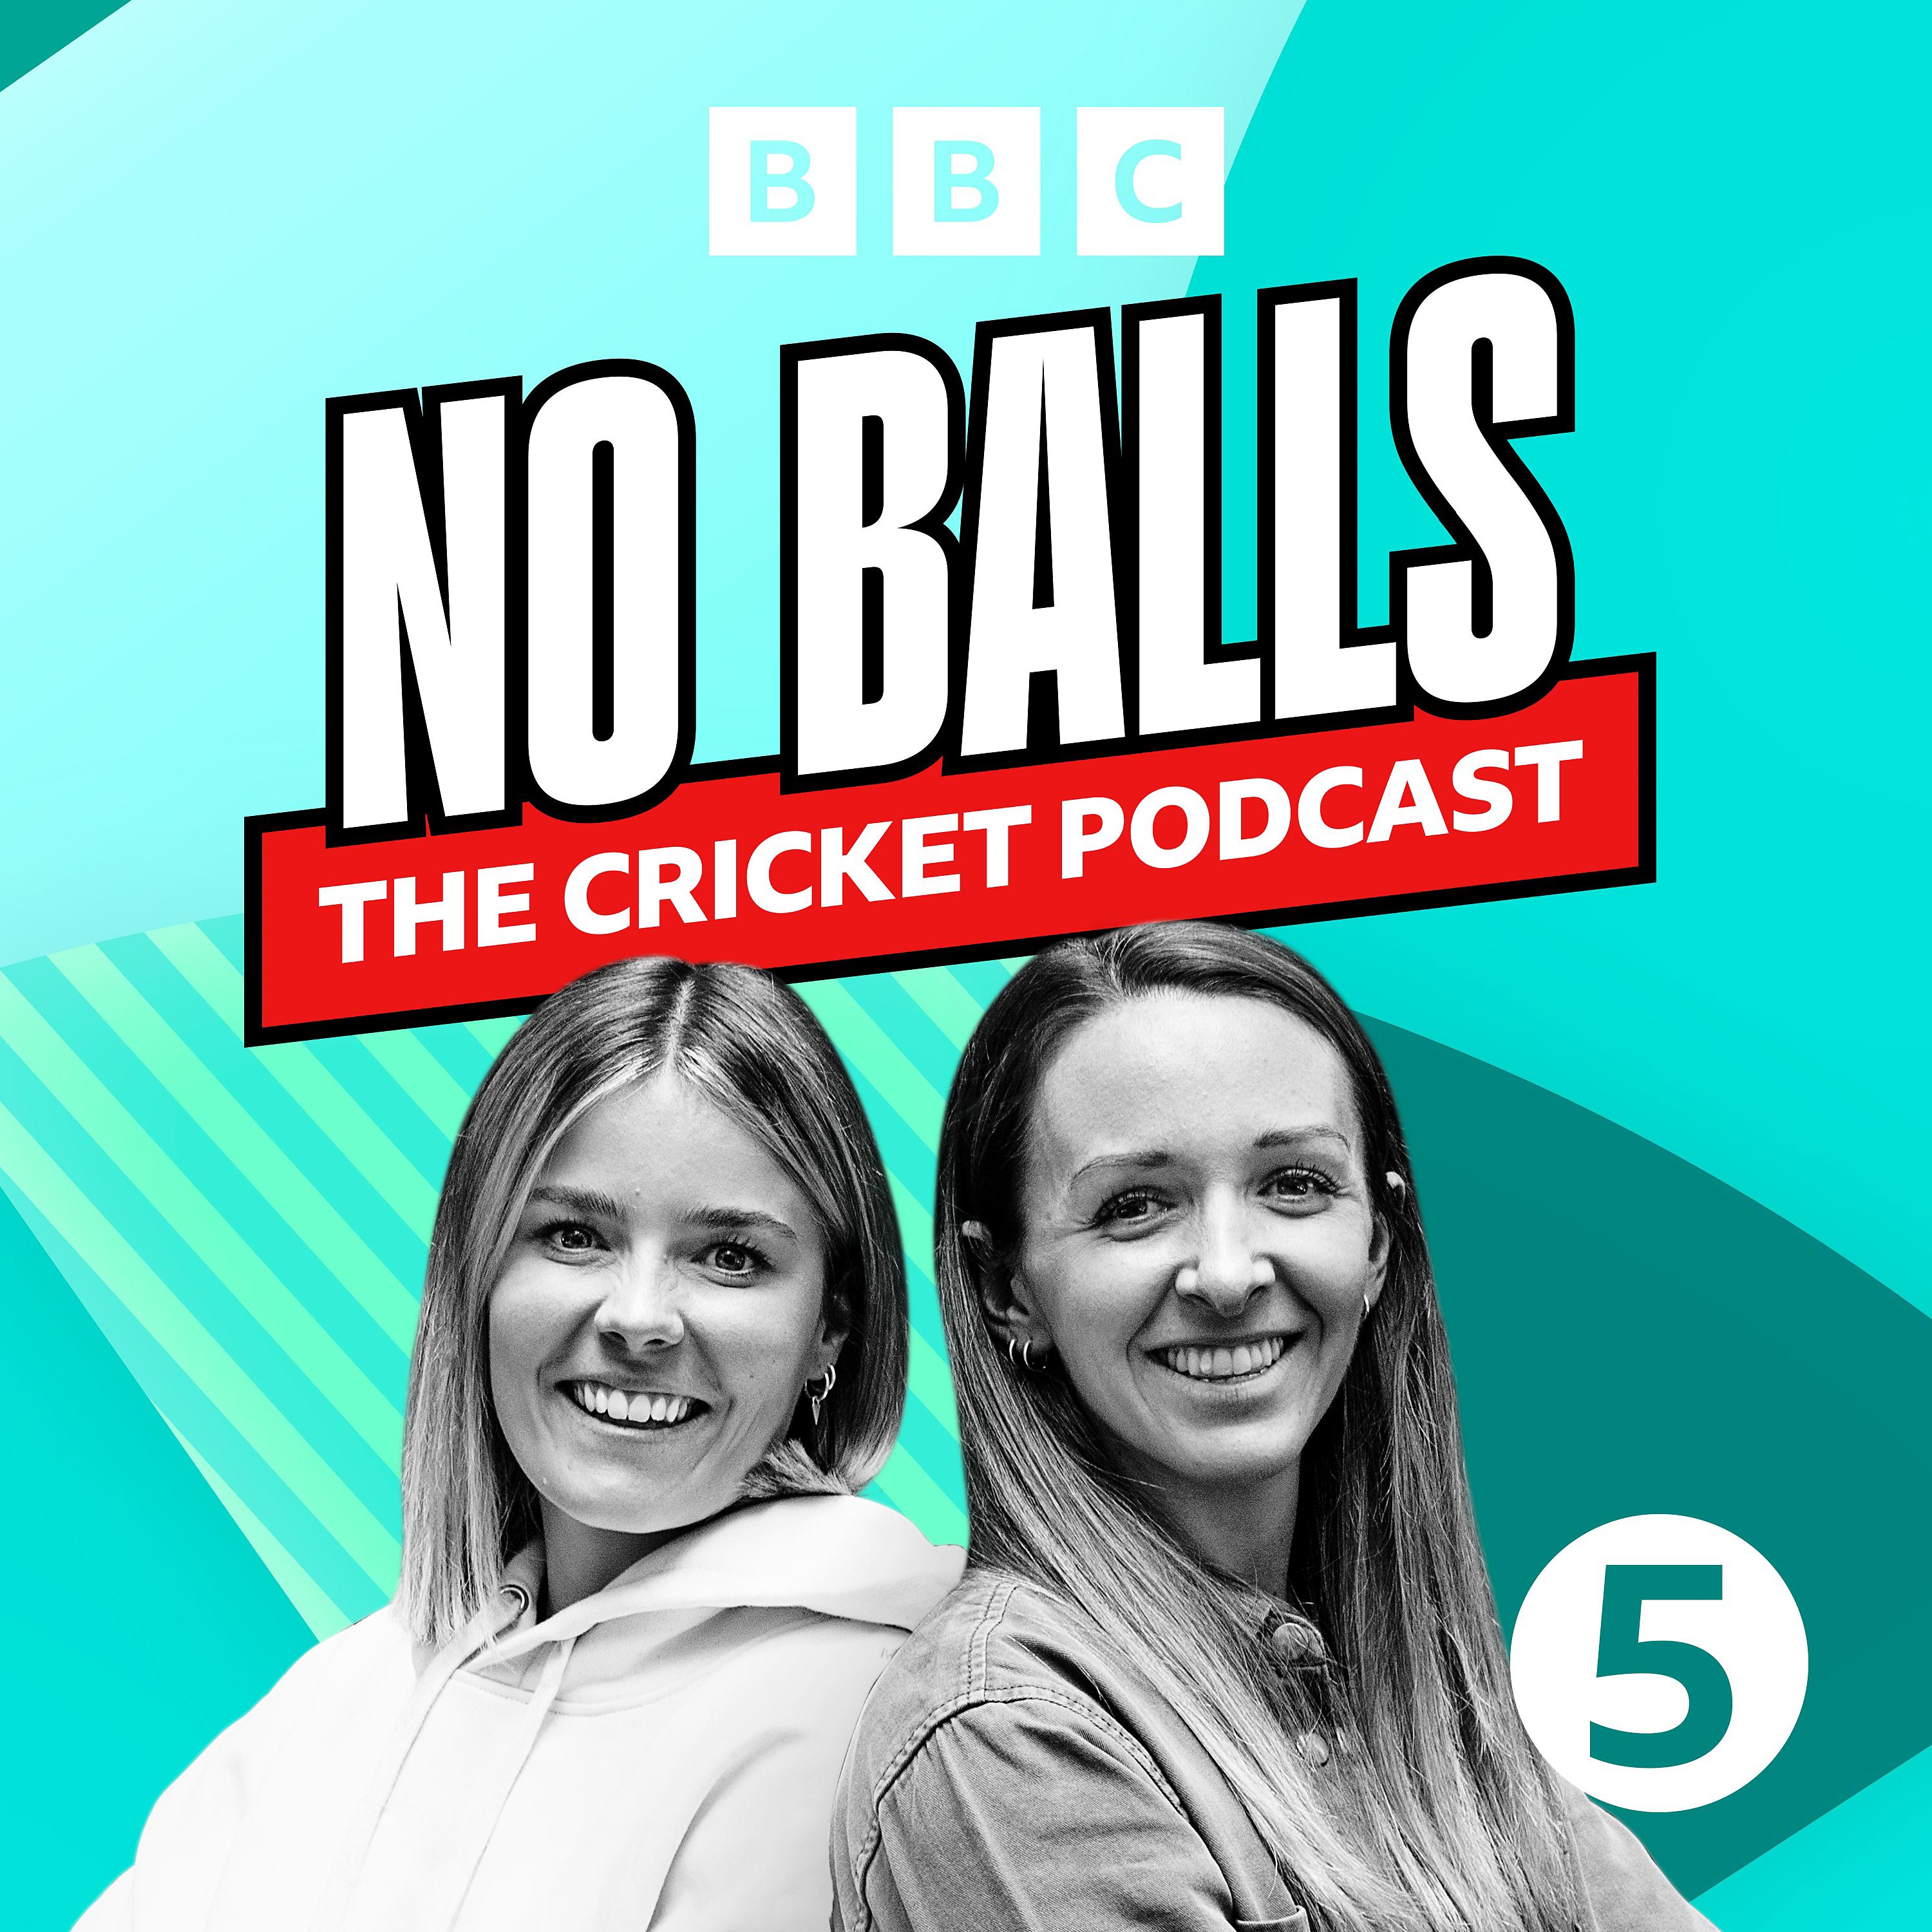 No Balls: The Cricket Podcast - Beckham's been at the cricket!